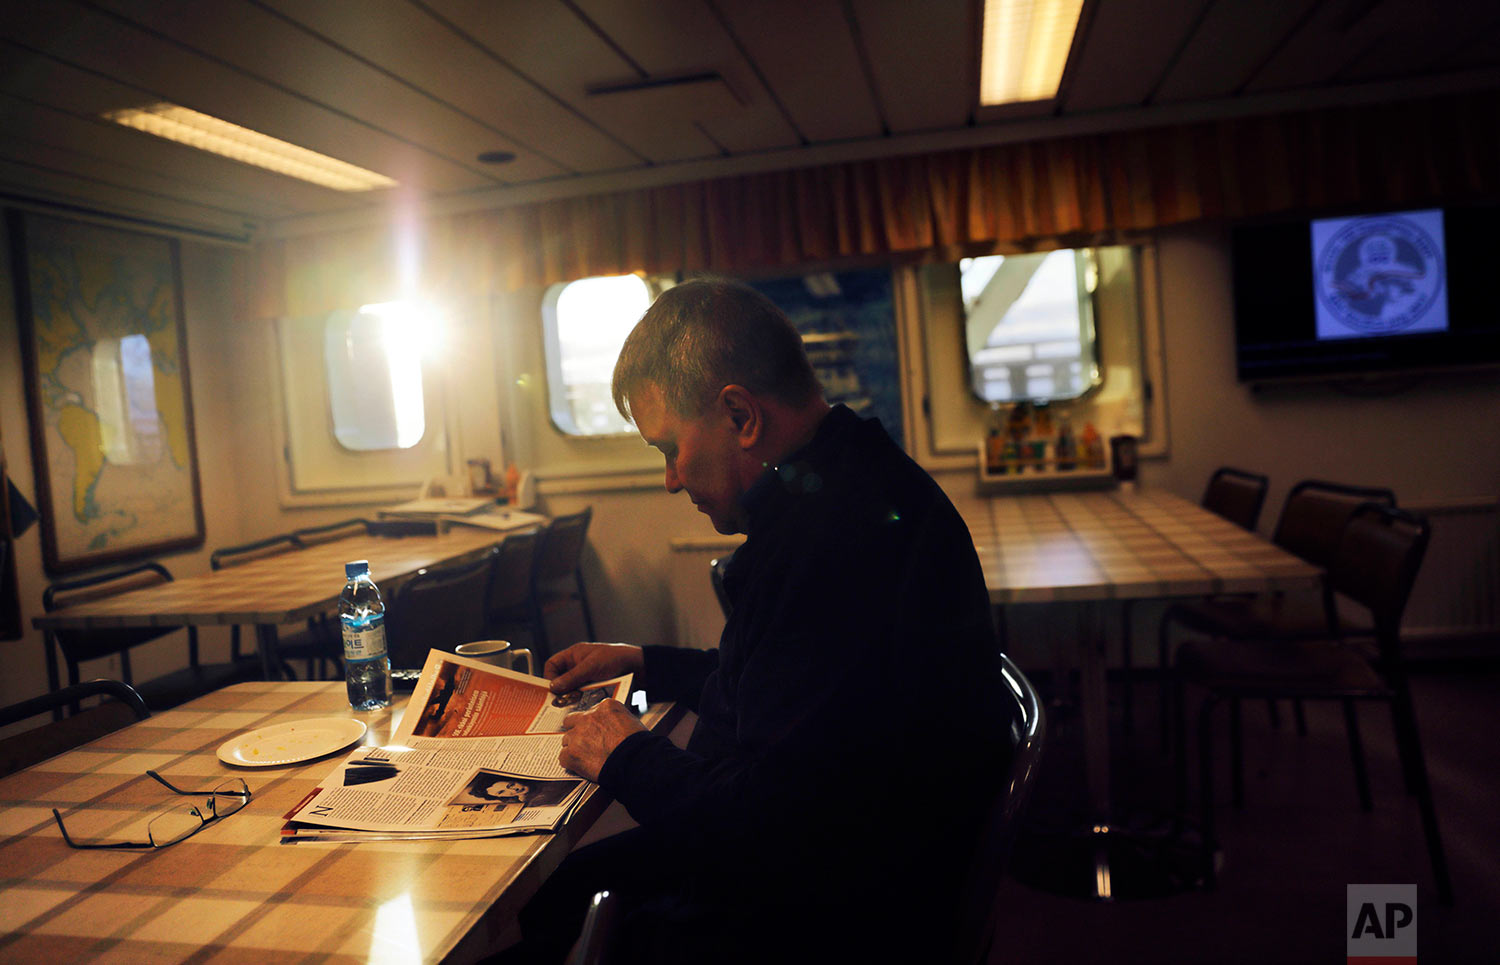  The sun shines through the window of the mess hall at midnight as first engineer Kari Suni reads a magazine over a cup of coffee before starting his shift in the engine room of the Finnish icebreaker MSV Nordica as it traverses the Northwest Passage